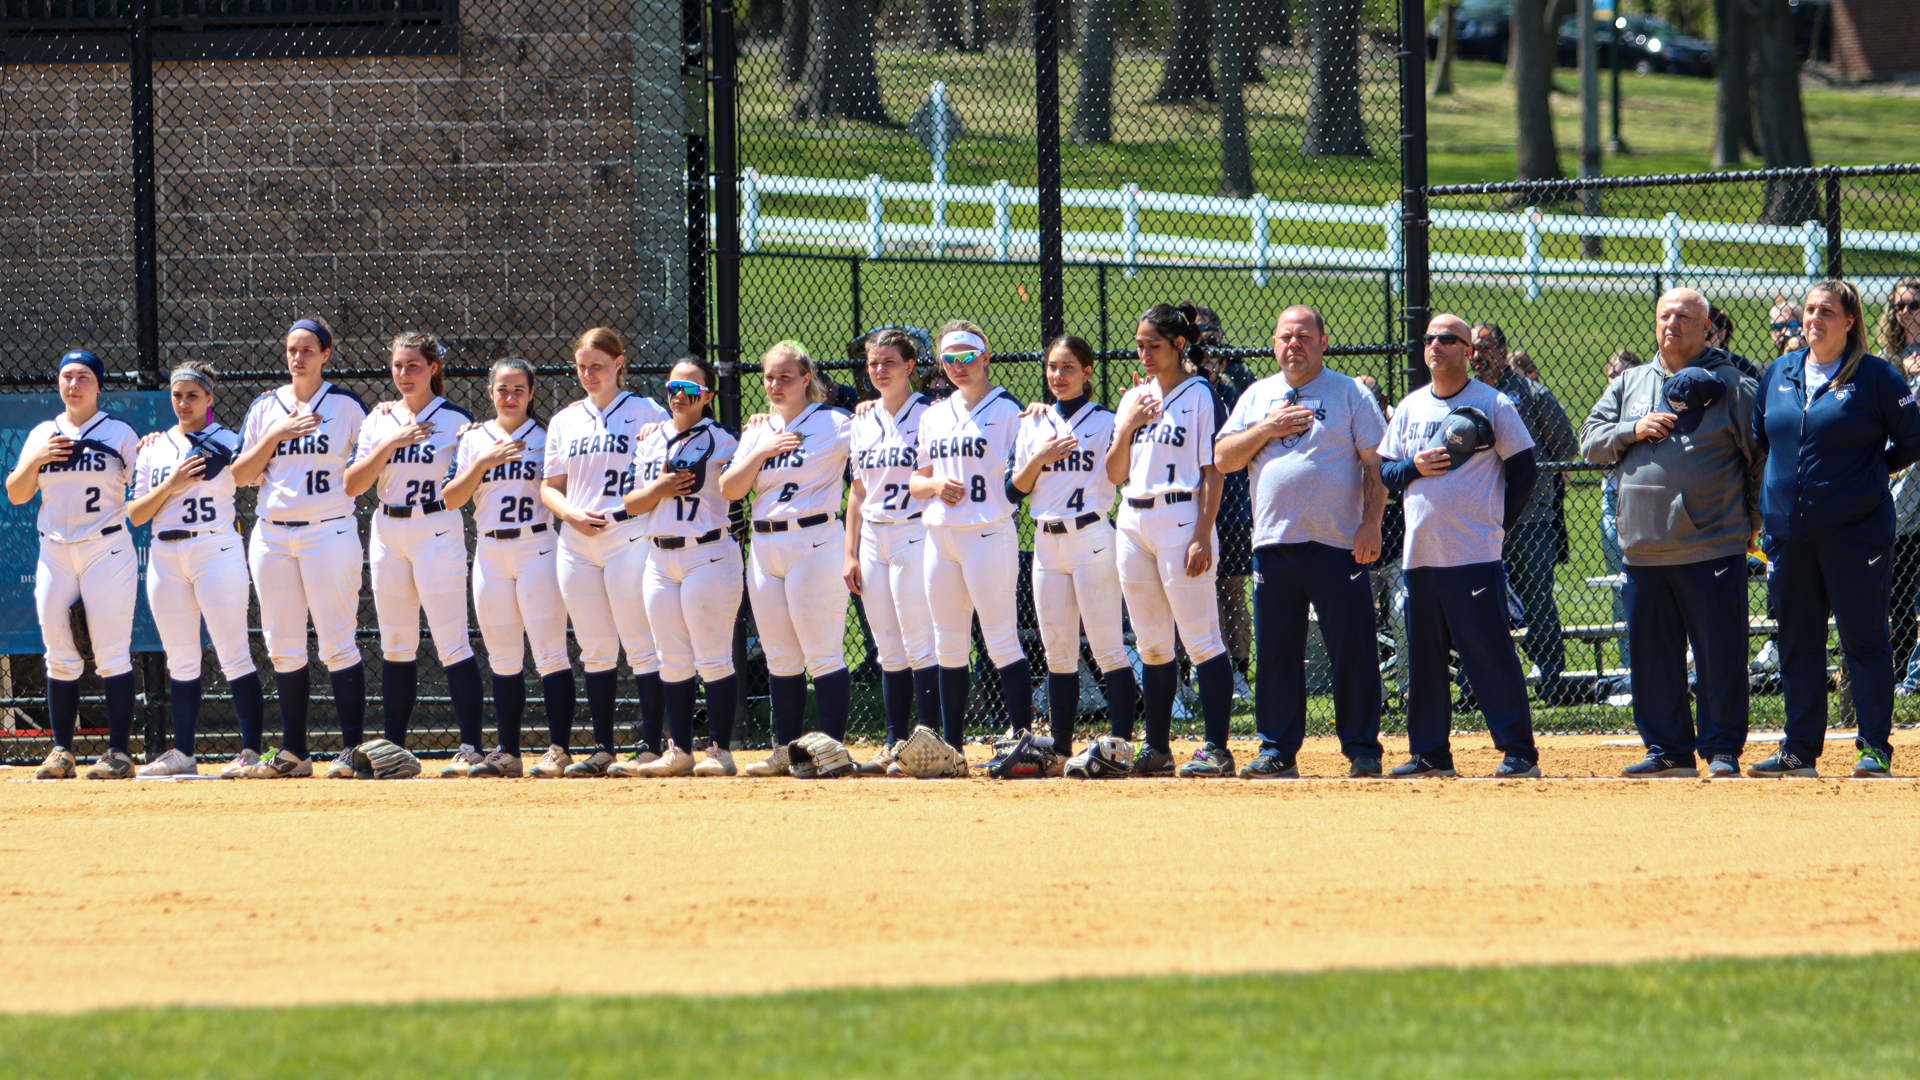 Softball Ends Season With Third Place at Skyline Championship, Falling to Manhattanville